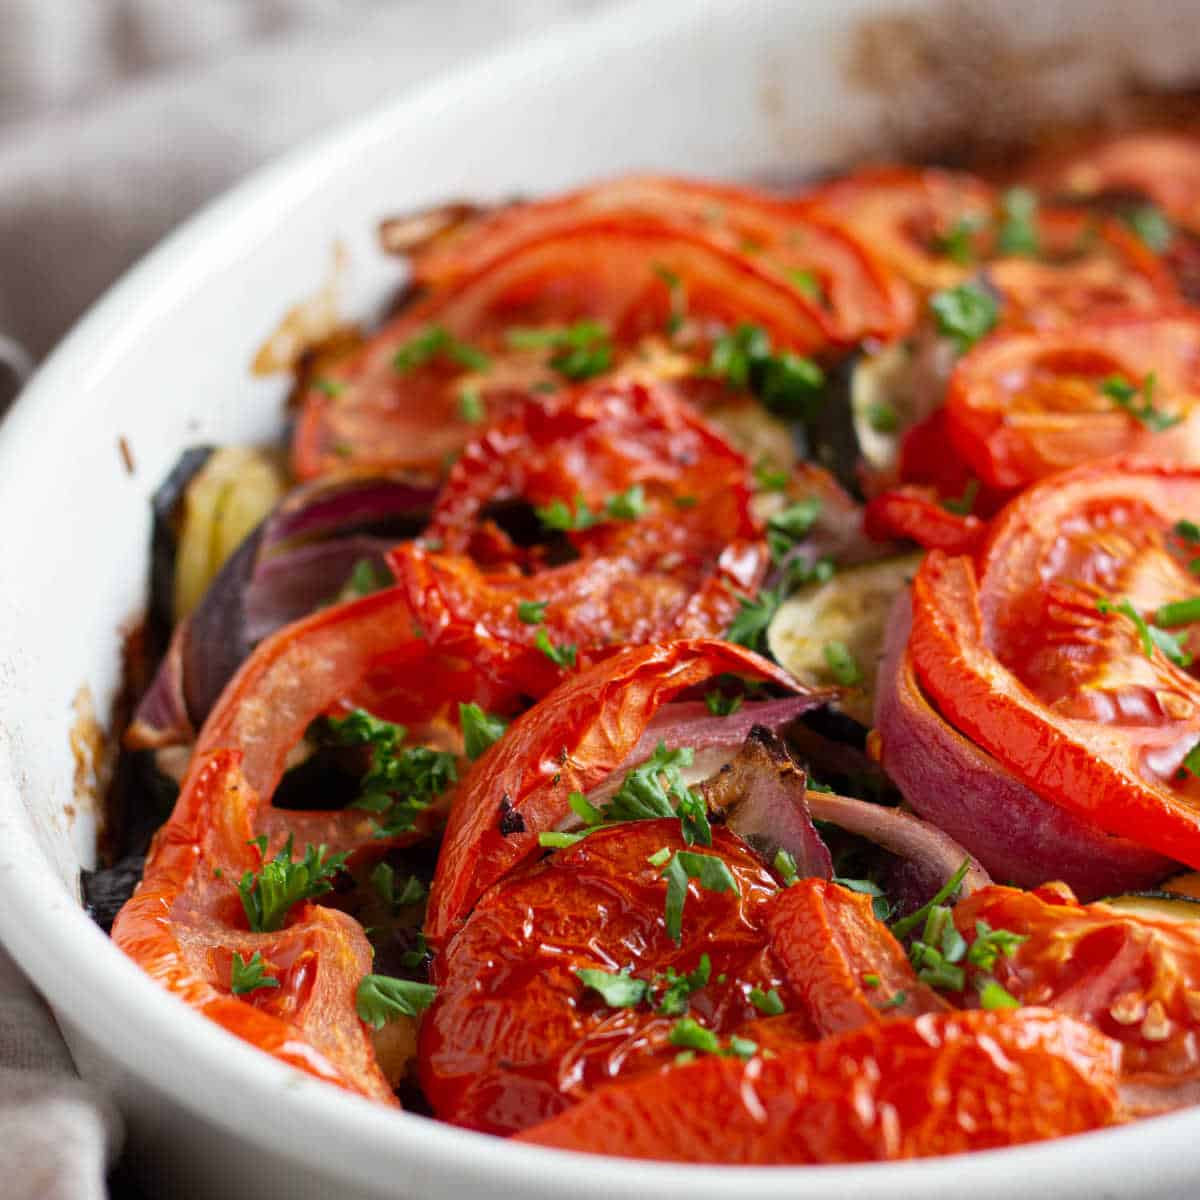 Briam is a Greek roasted vegetables dish cooked in olive oil. This easy and delicious recipe is made with just a few ingredients and is vegan, low carb and gluten free.
